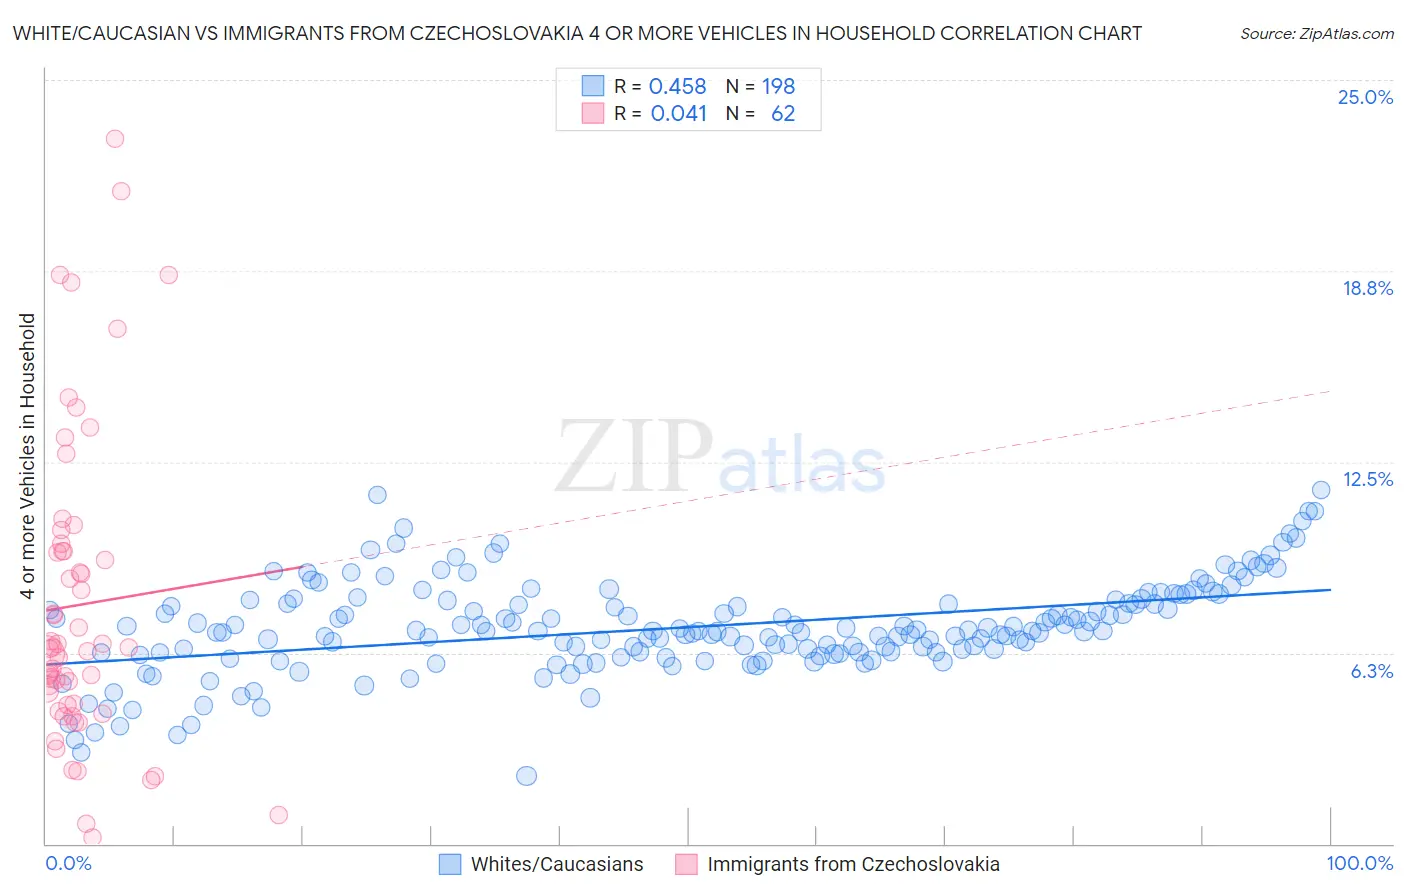 White/Caucasian vs Immigrants from Czechoslovakia 4 or more Vehicles in Household